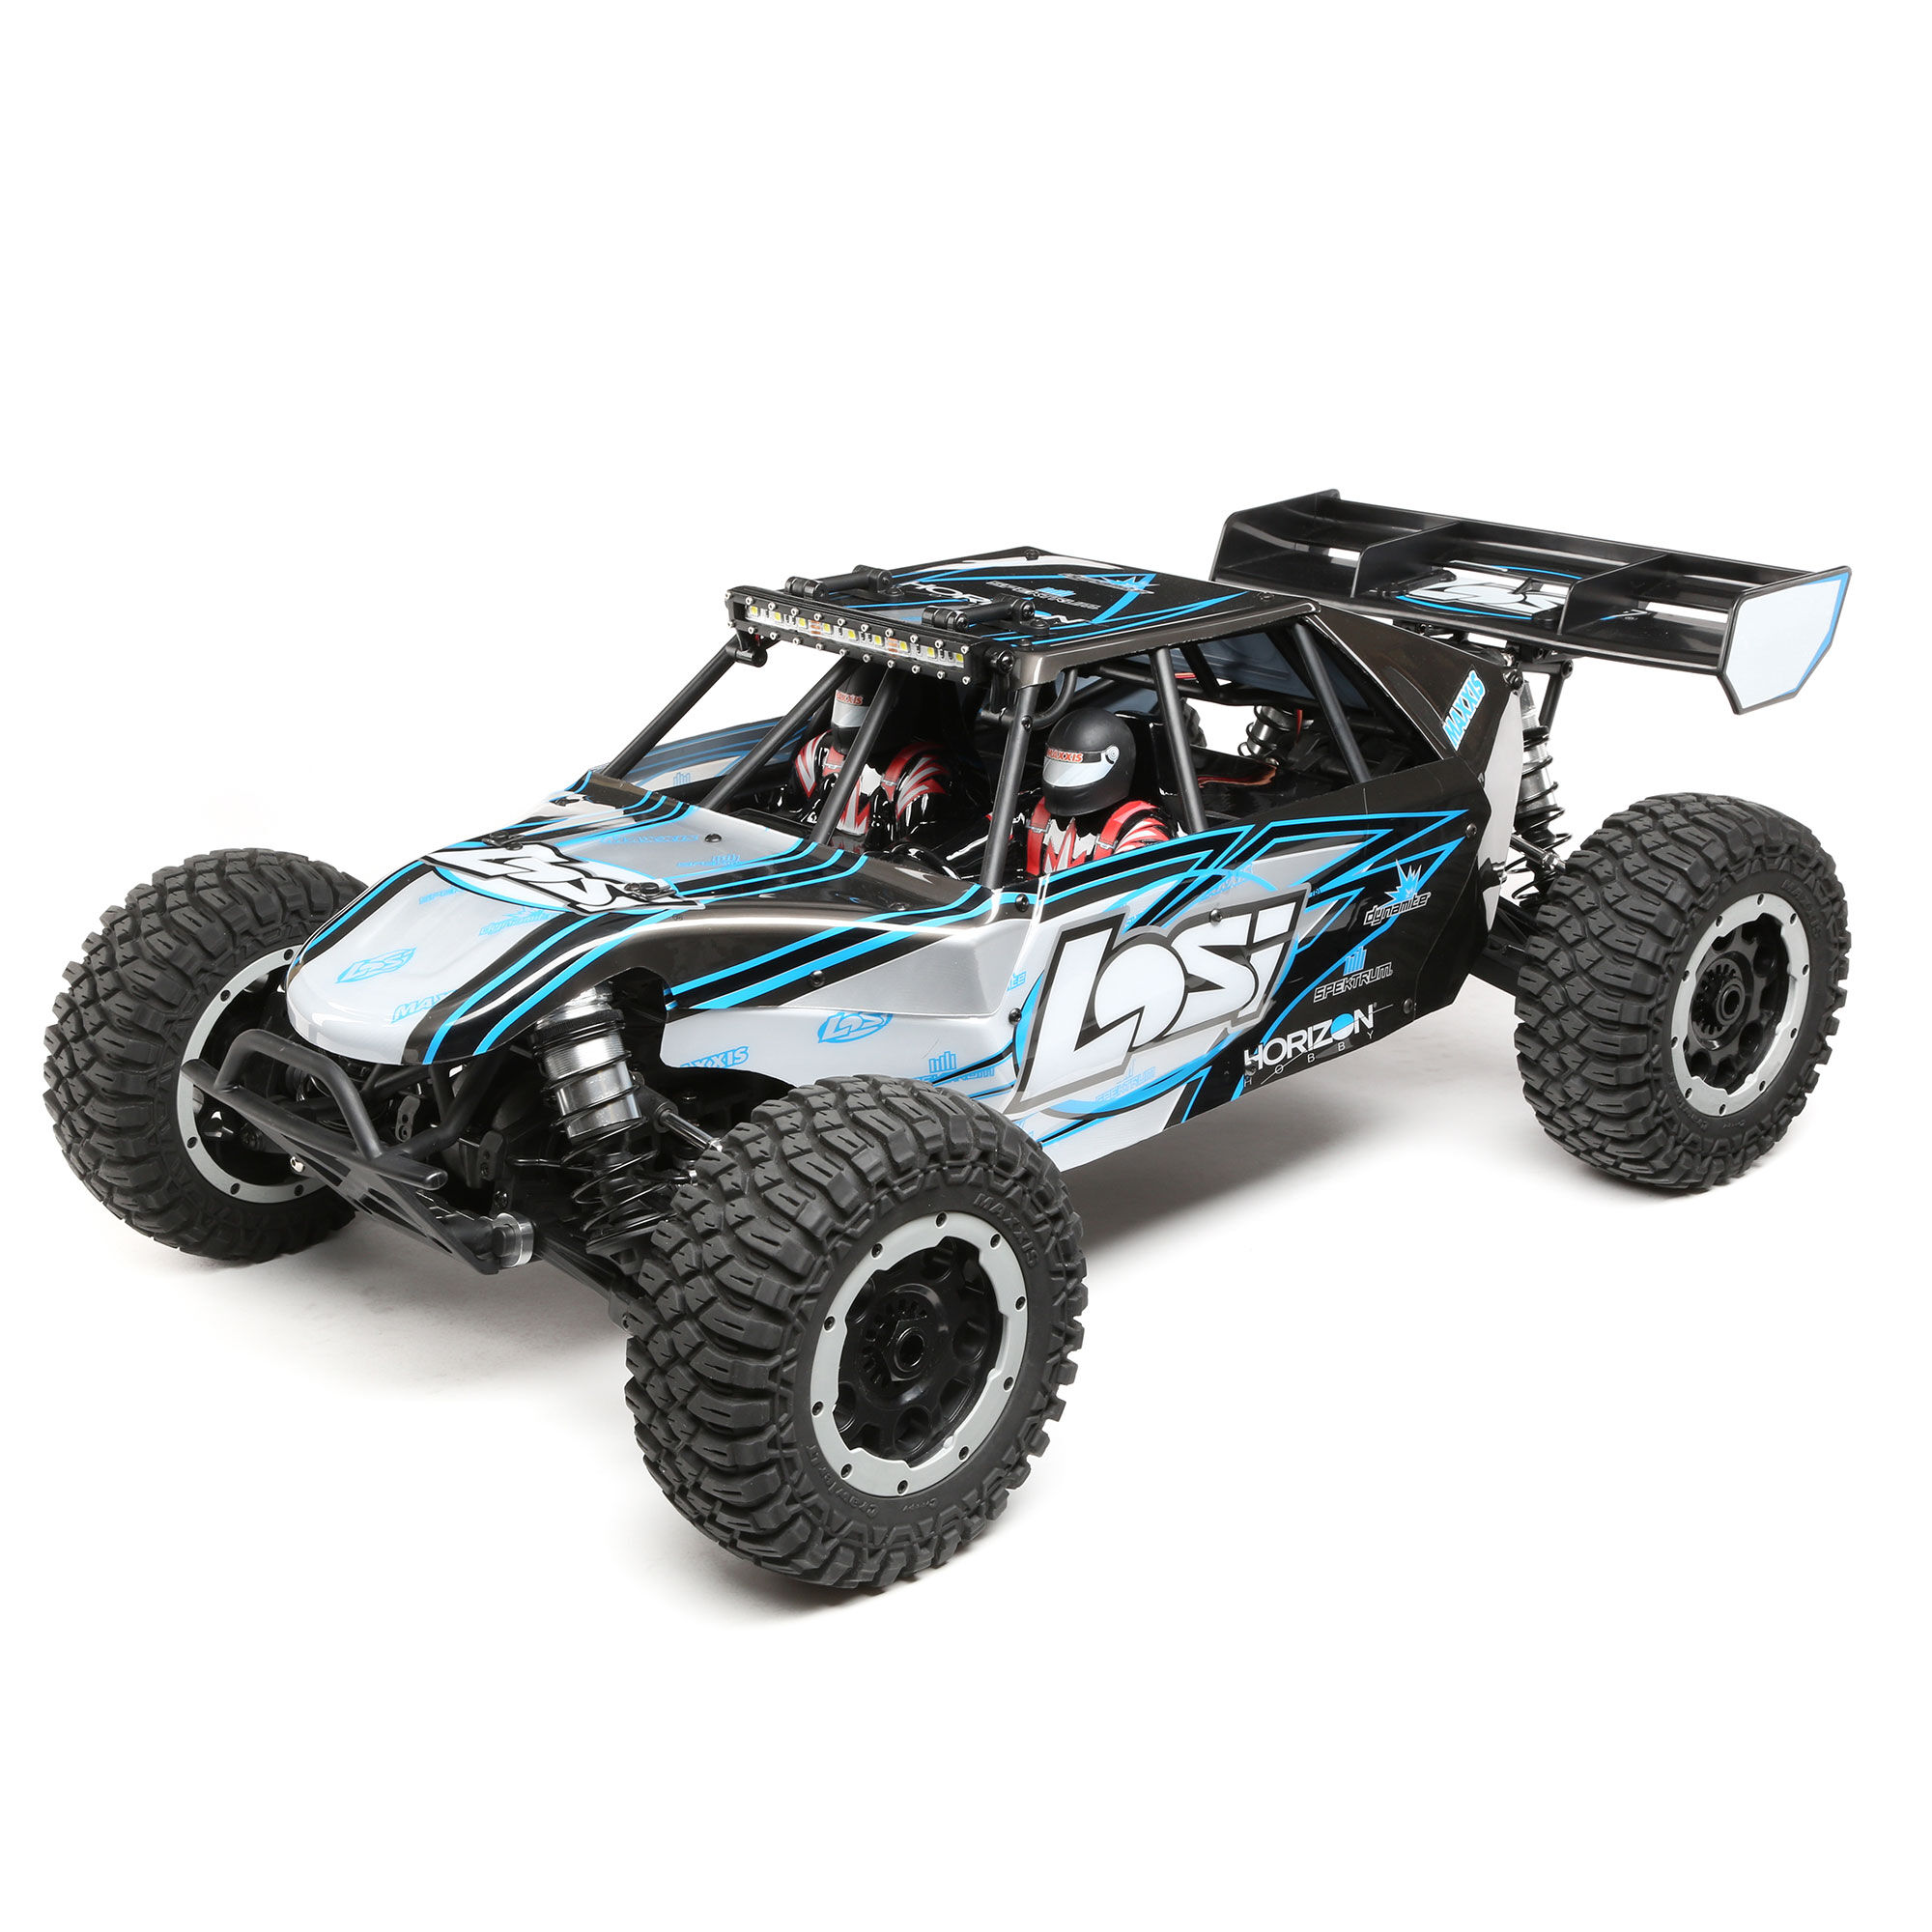 Losi 1/5 DBXL-E 4WD Brushless Desert Buggy RTR with AVC, Grey 